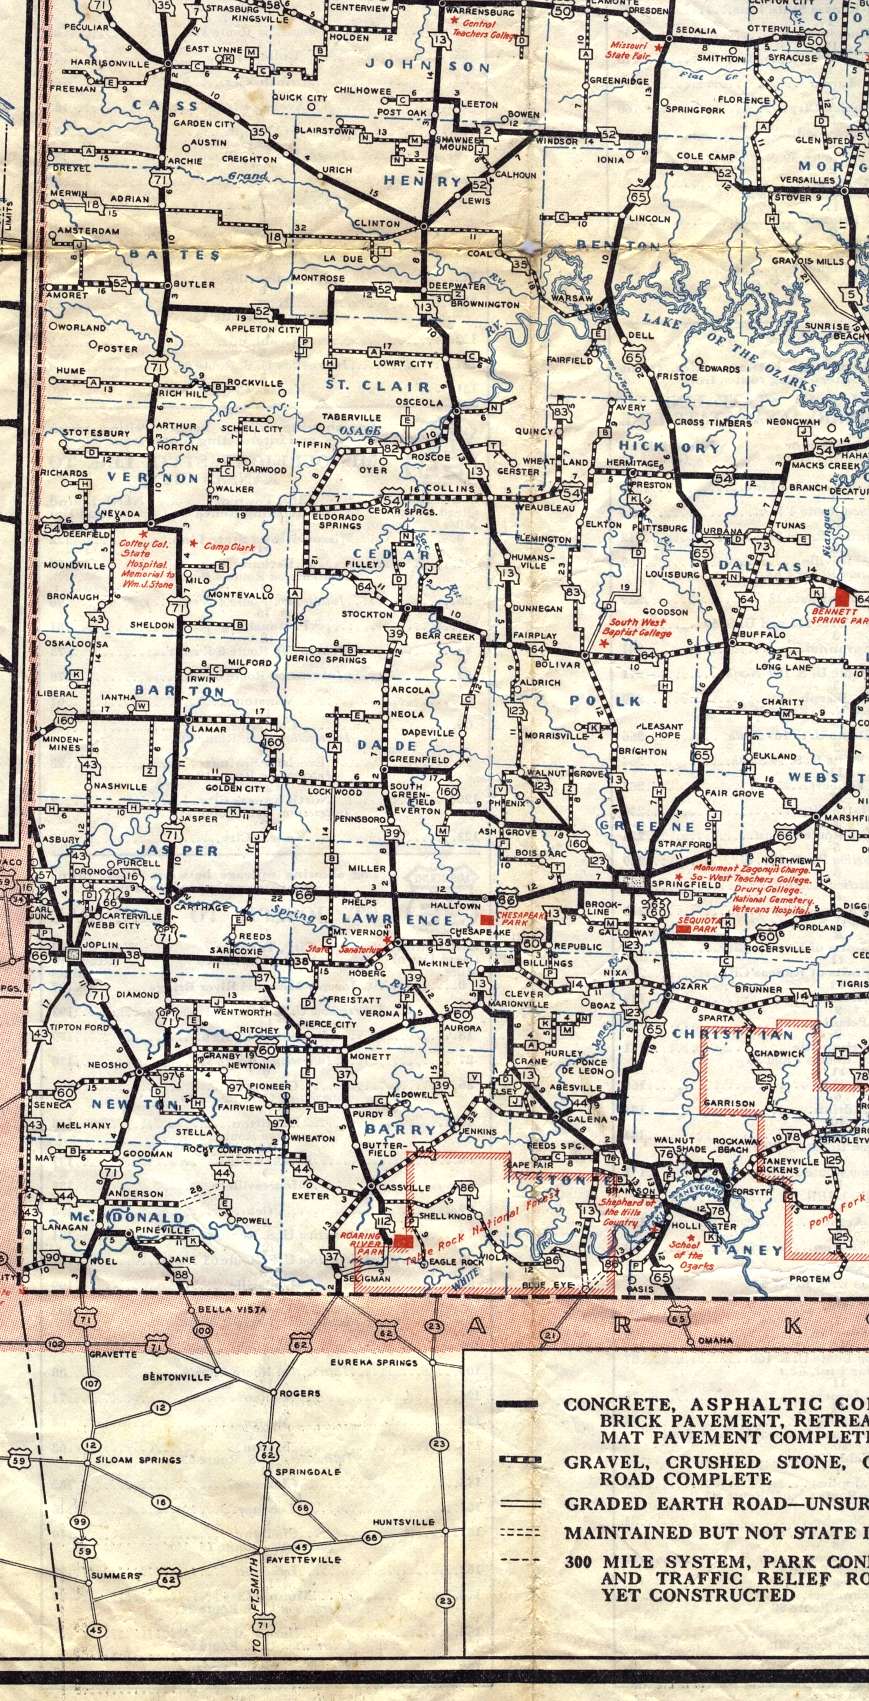 Section of 1936 official highway map for Missouri